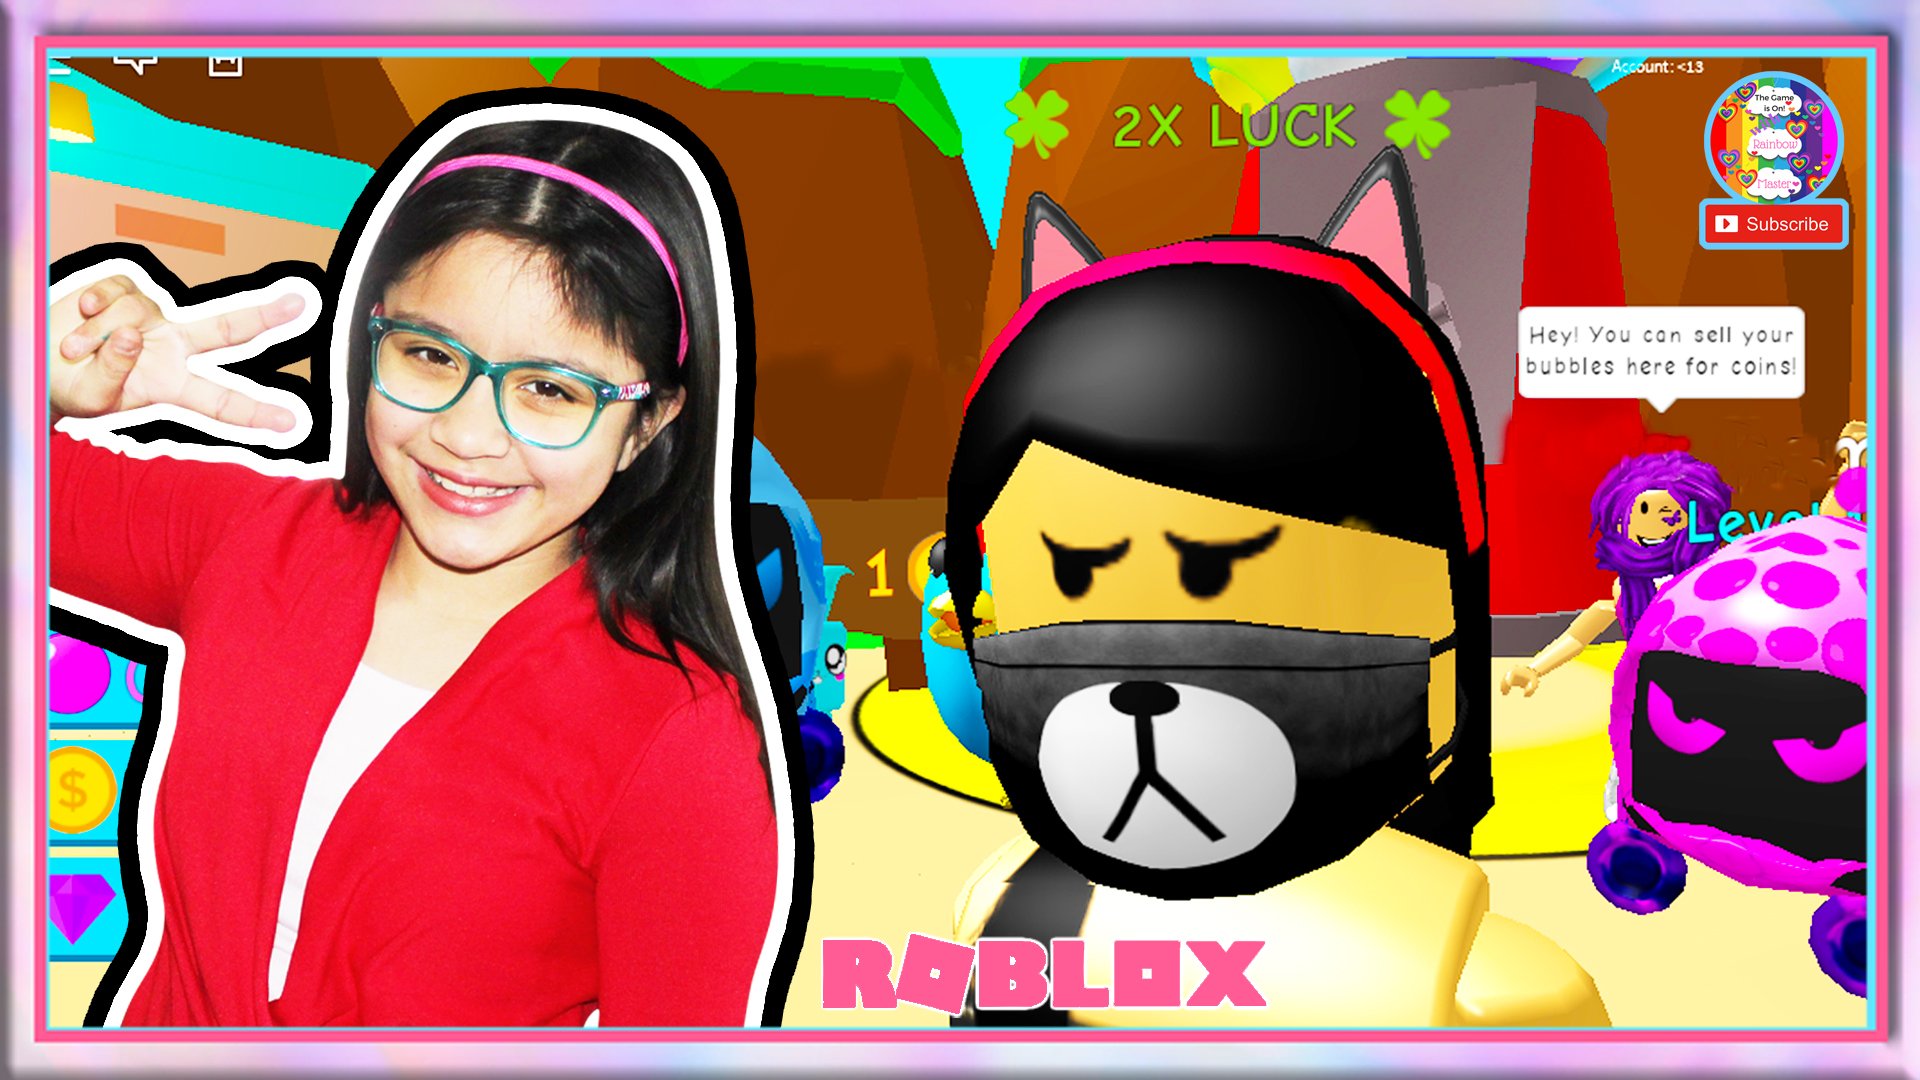 Rainbow Master Gaming Tv On Twitter Listen Watch Play Enjoy At Https T Co Gz84833i7d Rainbowmasterrules Rainbowmaster18 Rainbowmaster Roblox Bubblegumsimulator Robloxkids Gaming Videogames Pcgames Kidfriendly Nocursinggames Robloxfamily - master of luck roblox